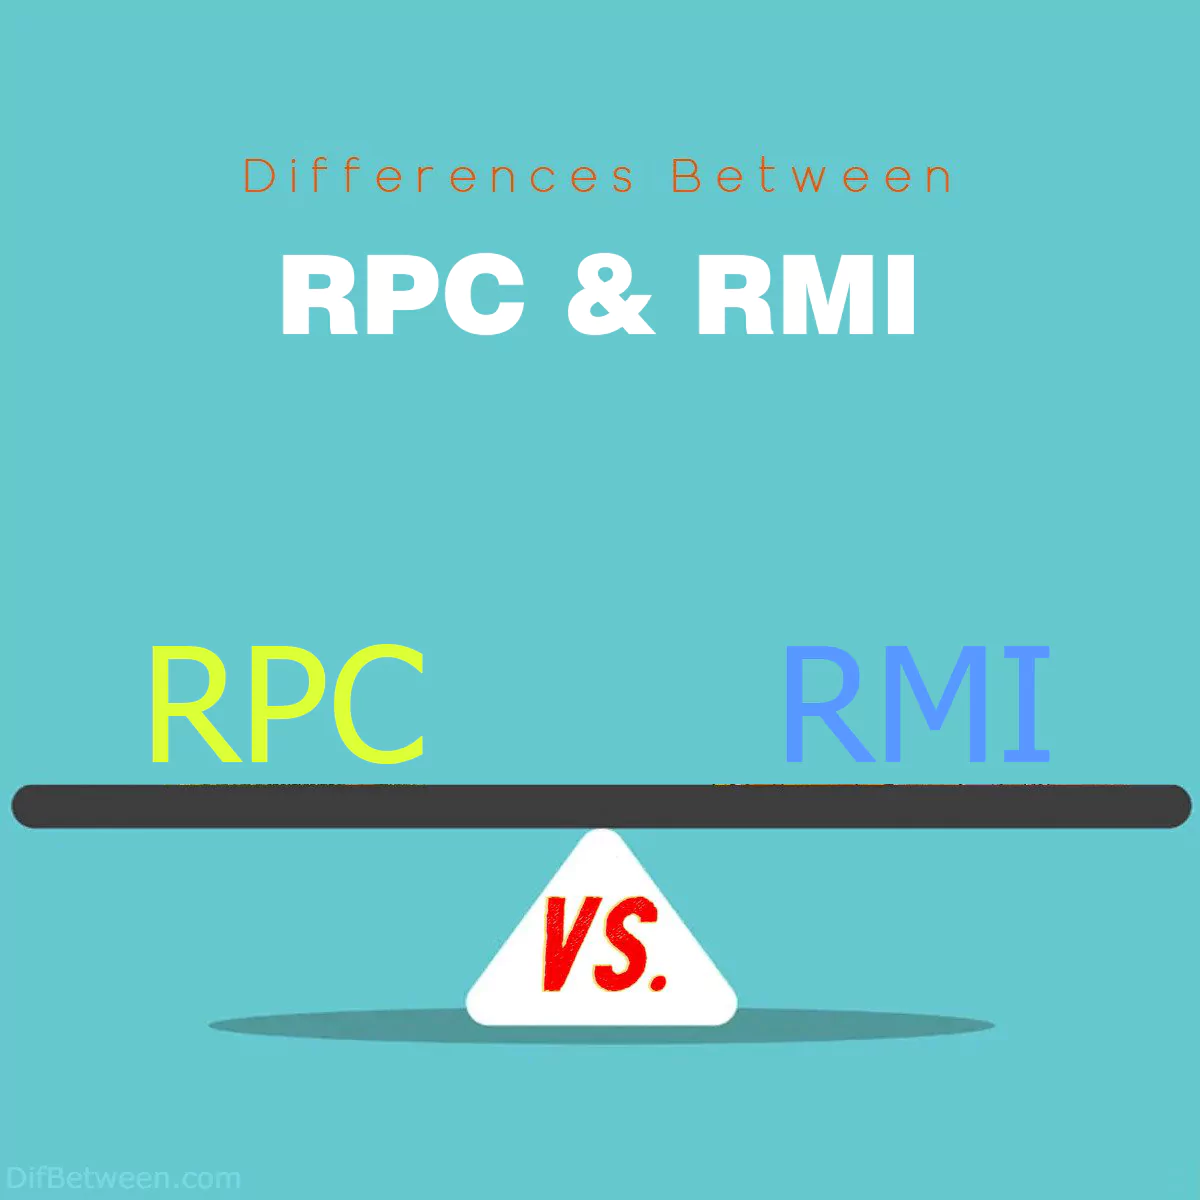 Differences Between RPC and RMI